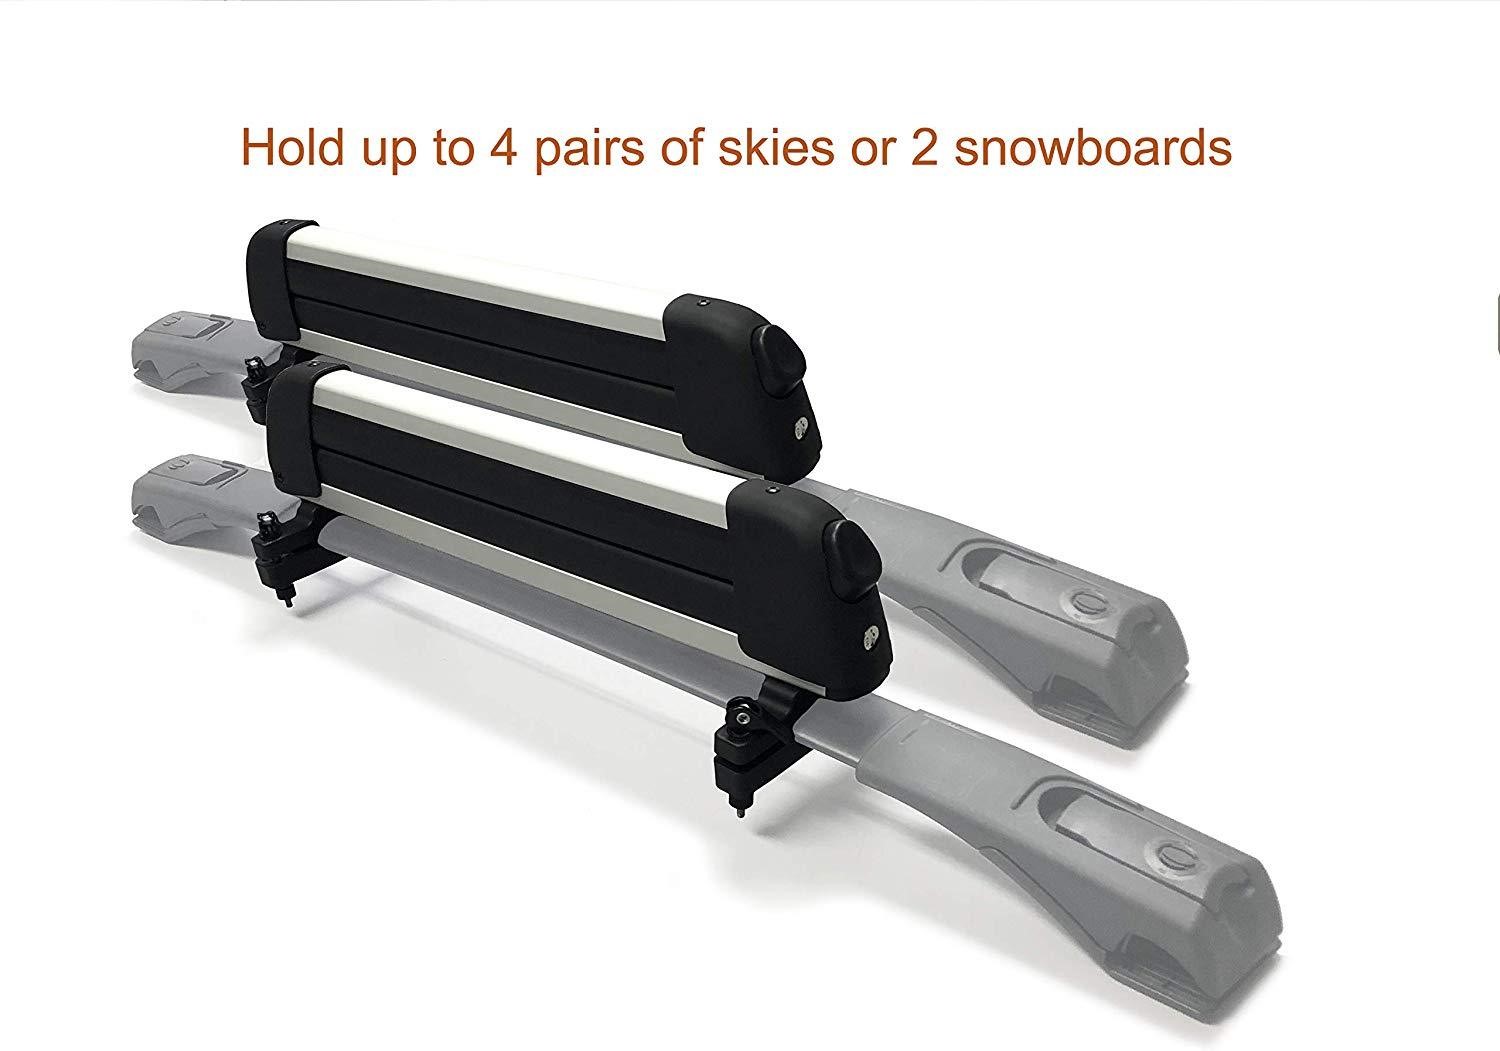 BRIGHTLINES Universal Ski Snowboard Racks Carriers 2pcs Mount on Vehicle Top Cross Bars (Up to 4 Skis or 2 Snowboards) - image 2 of 9